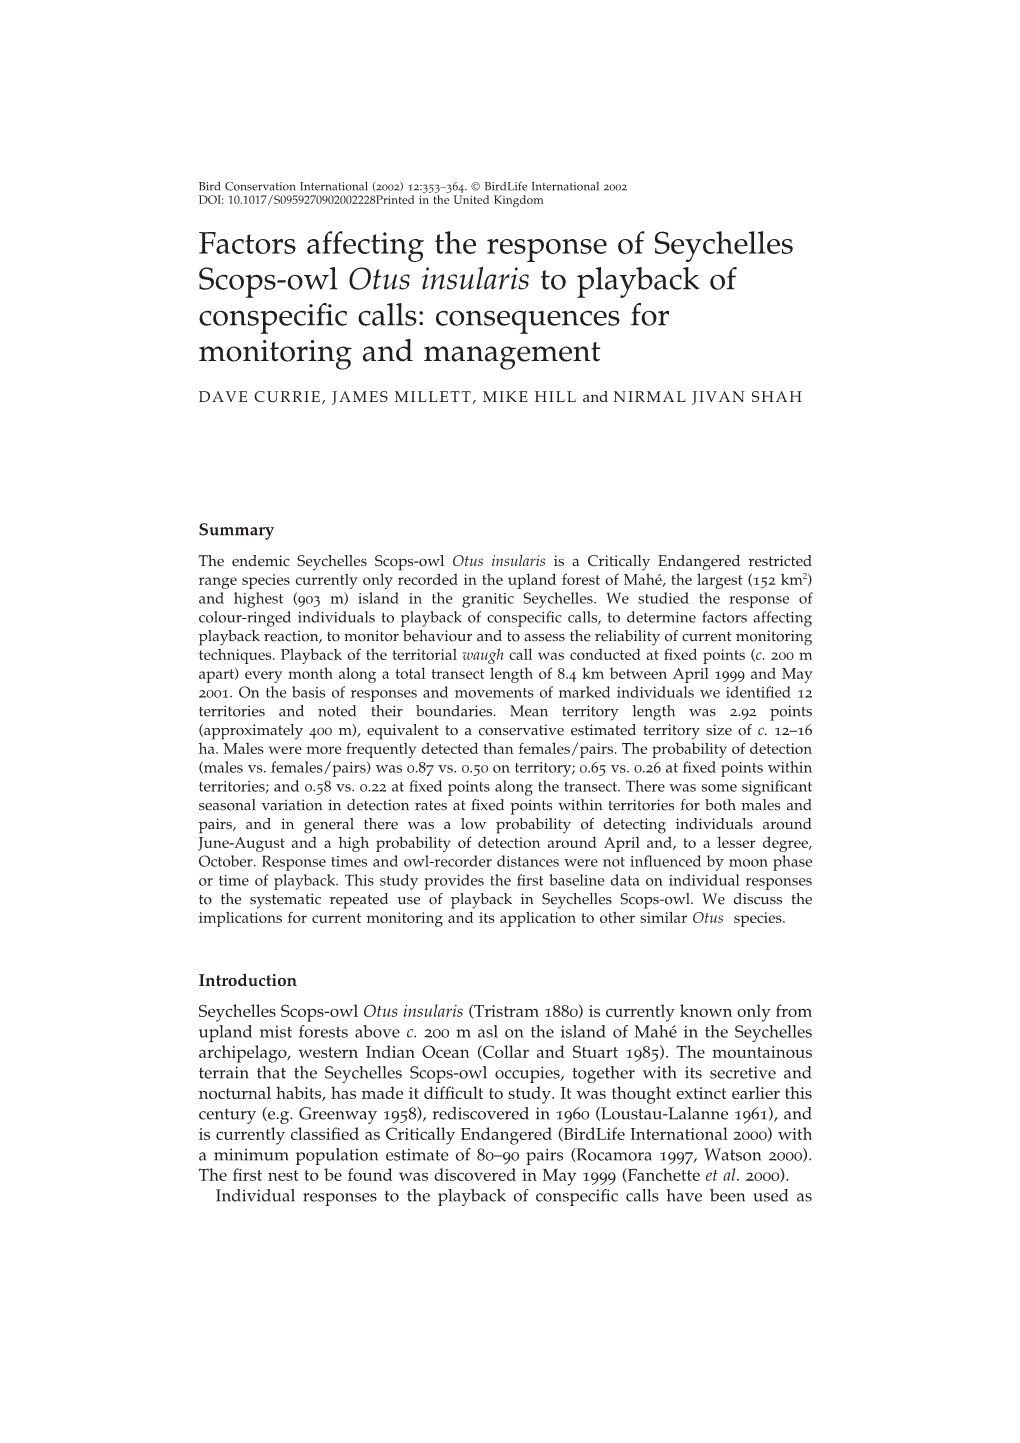 Factors Affecting the Response of Seychelles Scops-Owl Otus Insularis to Playback of Conspeciﬁc Calls: Consequences for Monitoring and Management